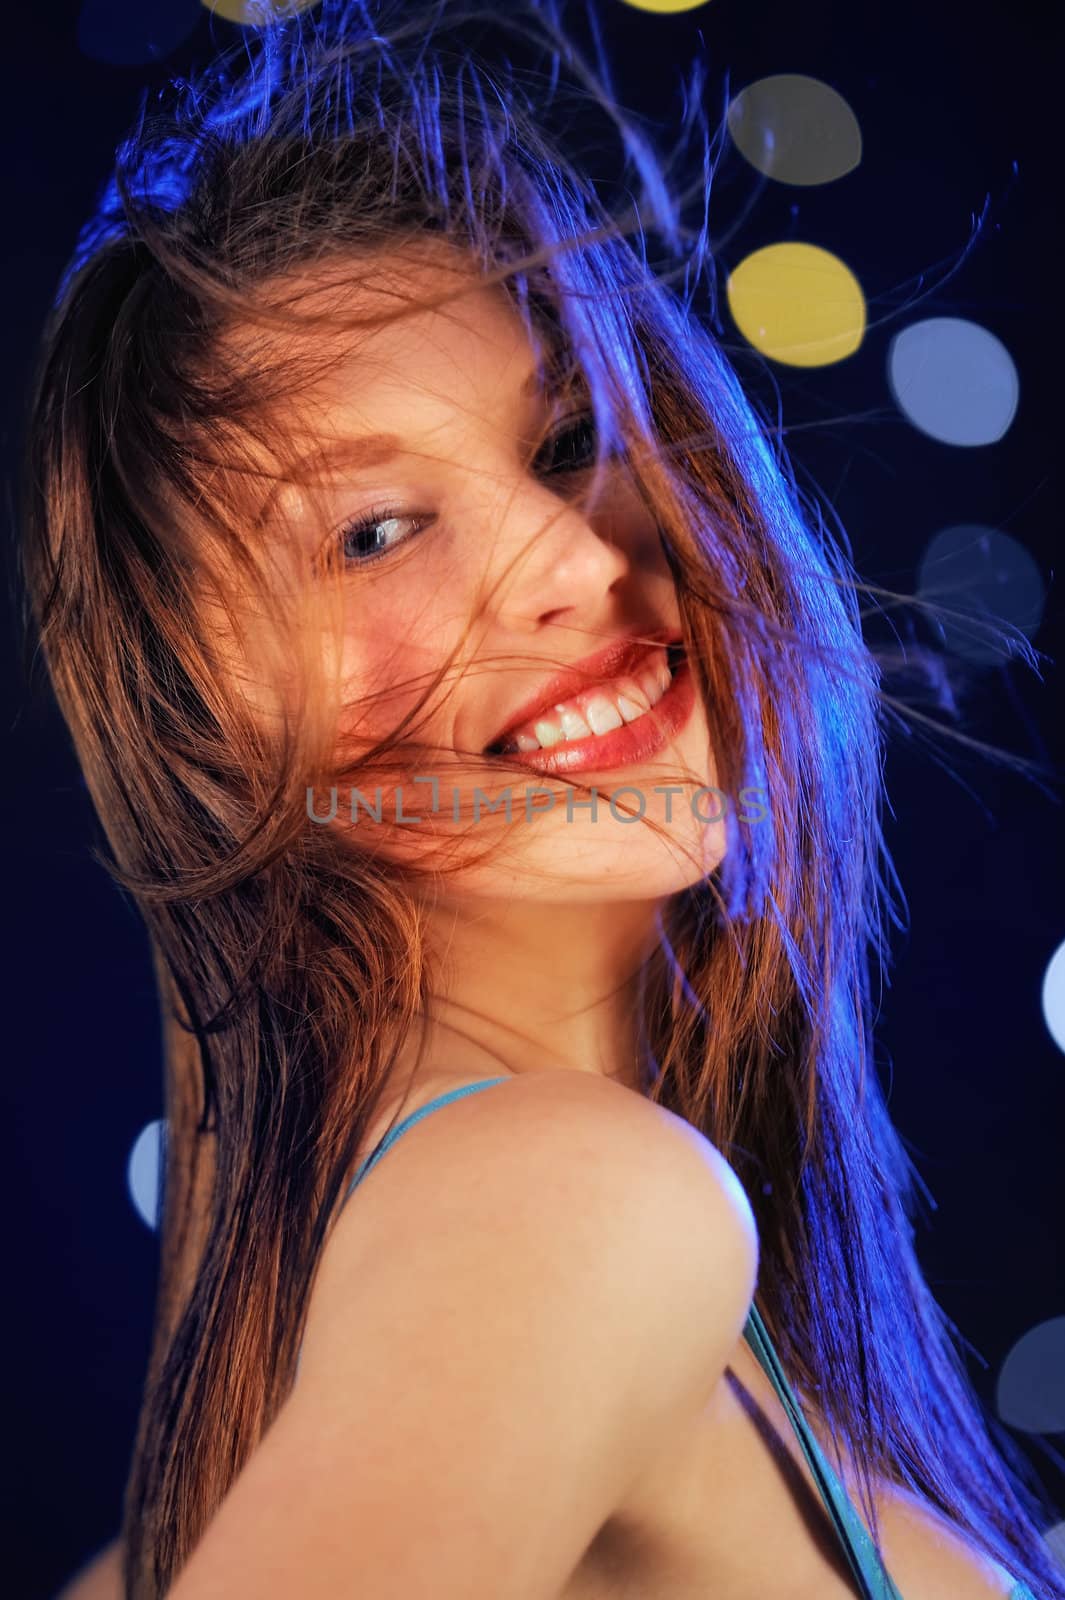 Young woman smiling. On the night disco